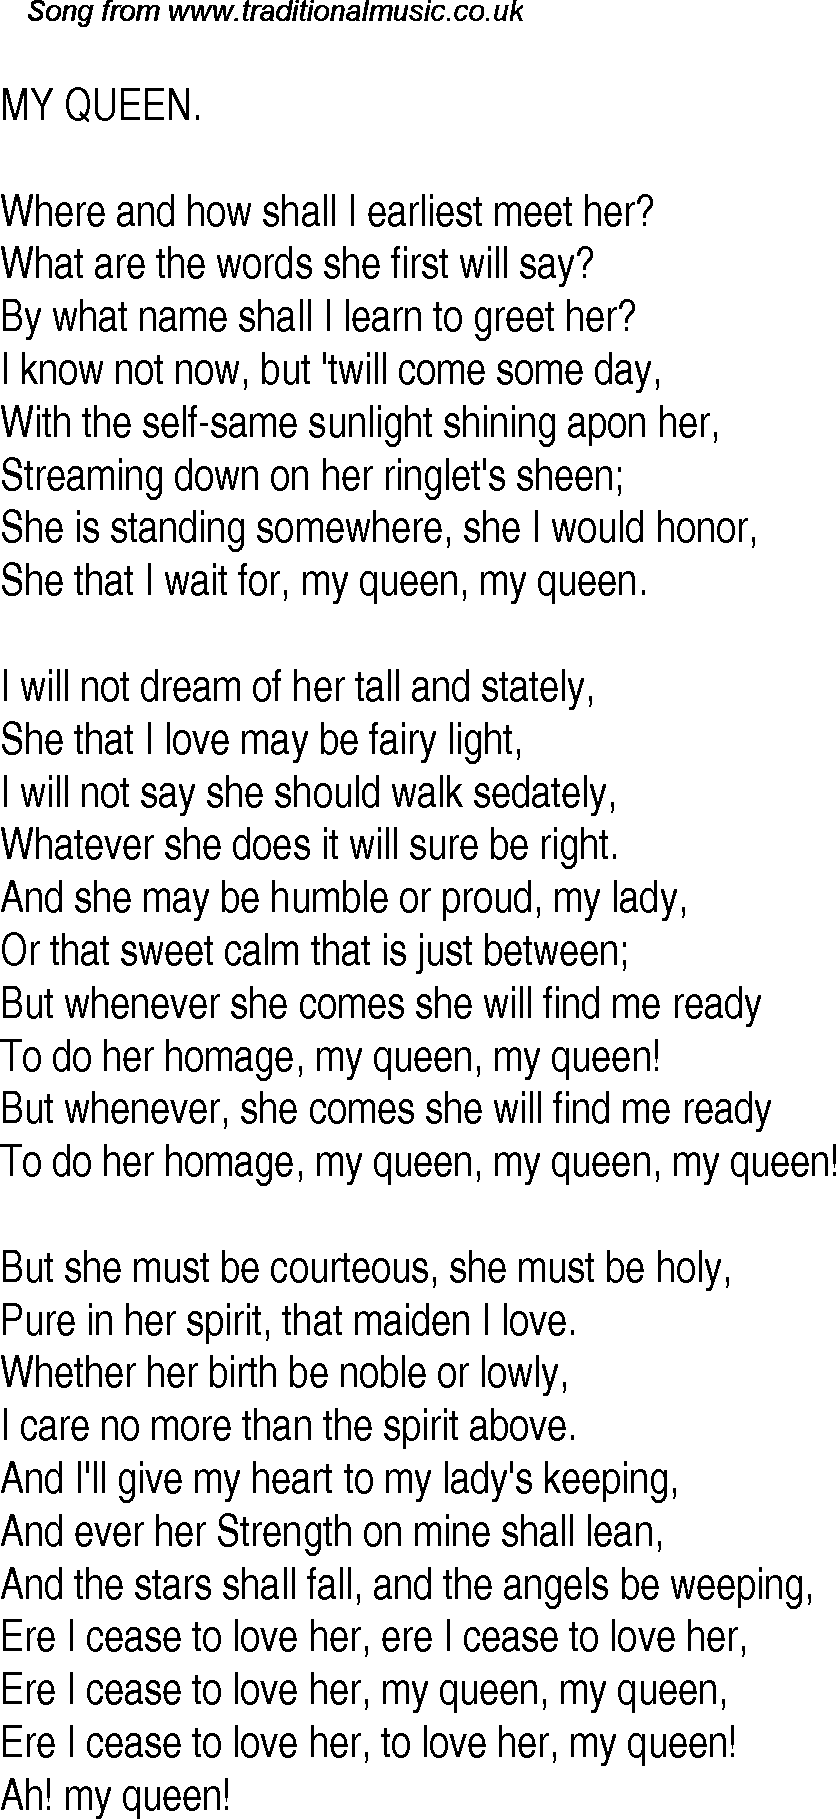 Old Time Song Lyrics for 17 My Queen